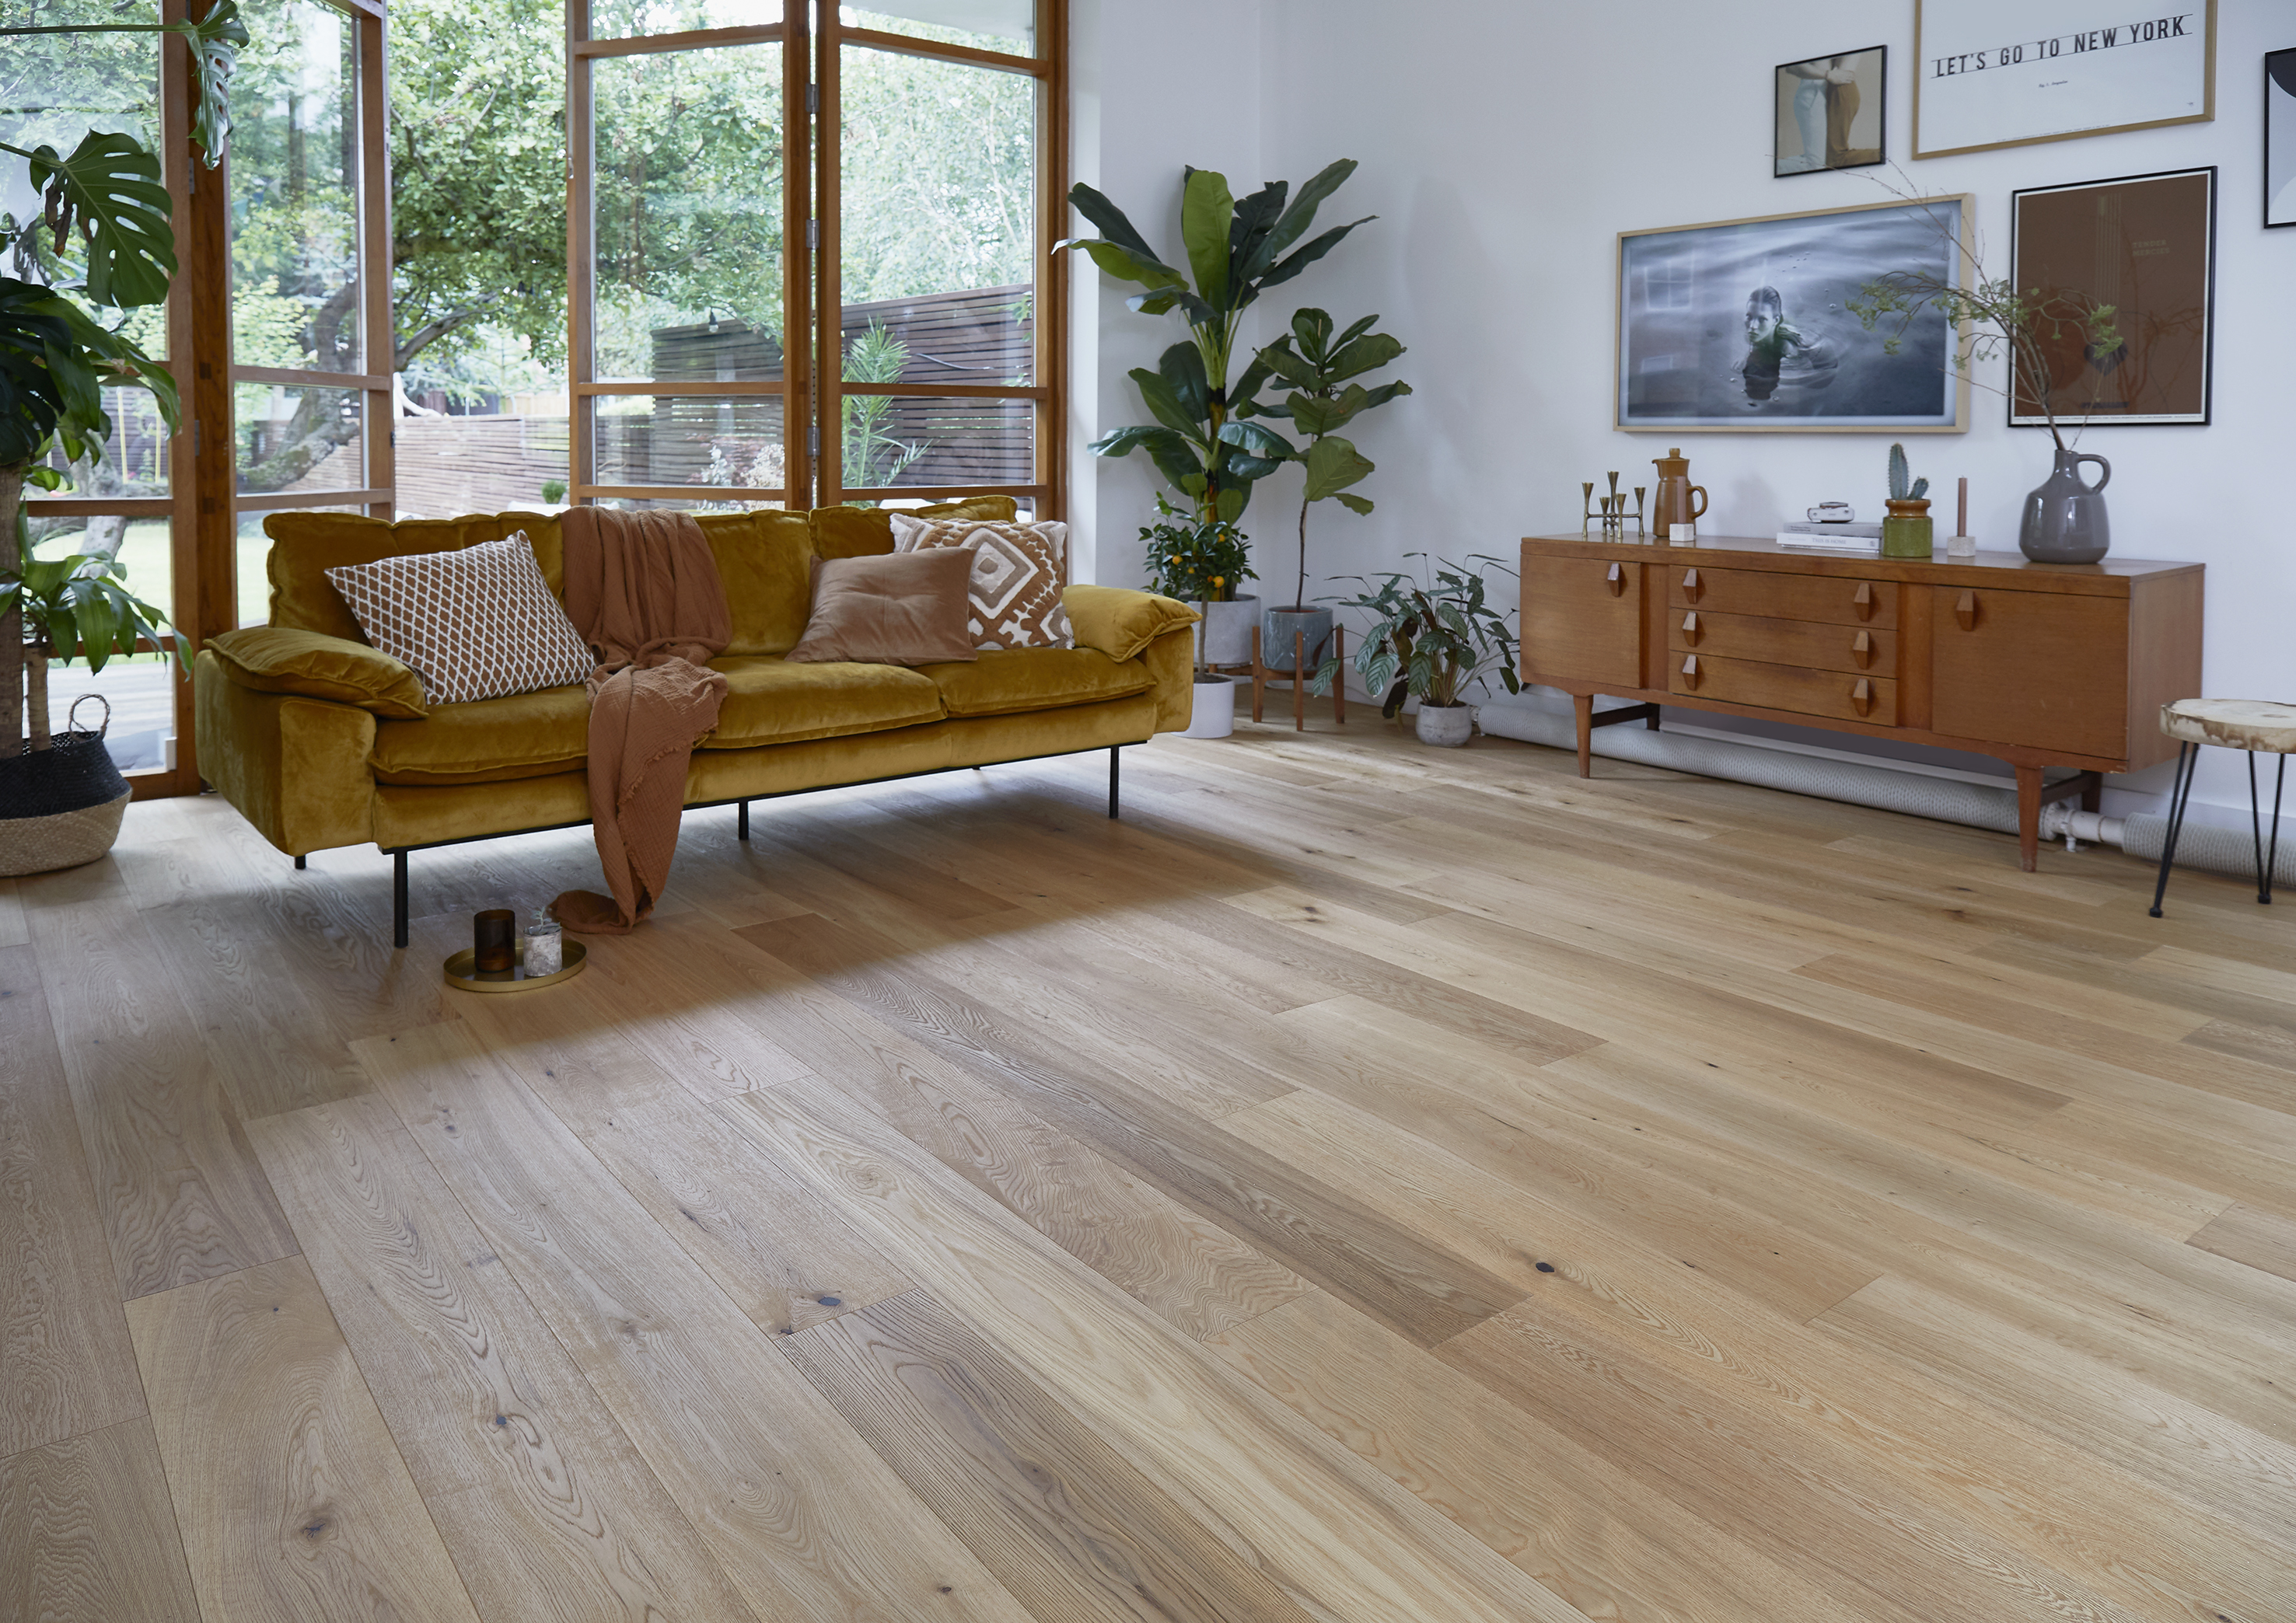 Types Of Flooring The Complete Guide, How To Choose Living Room Flooring